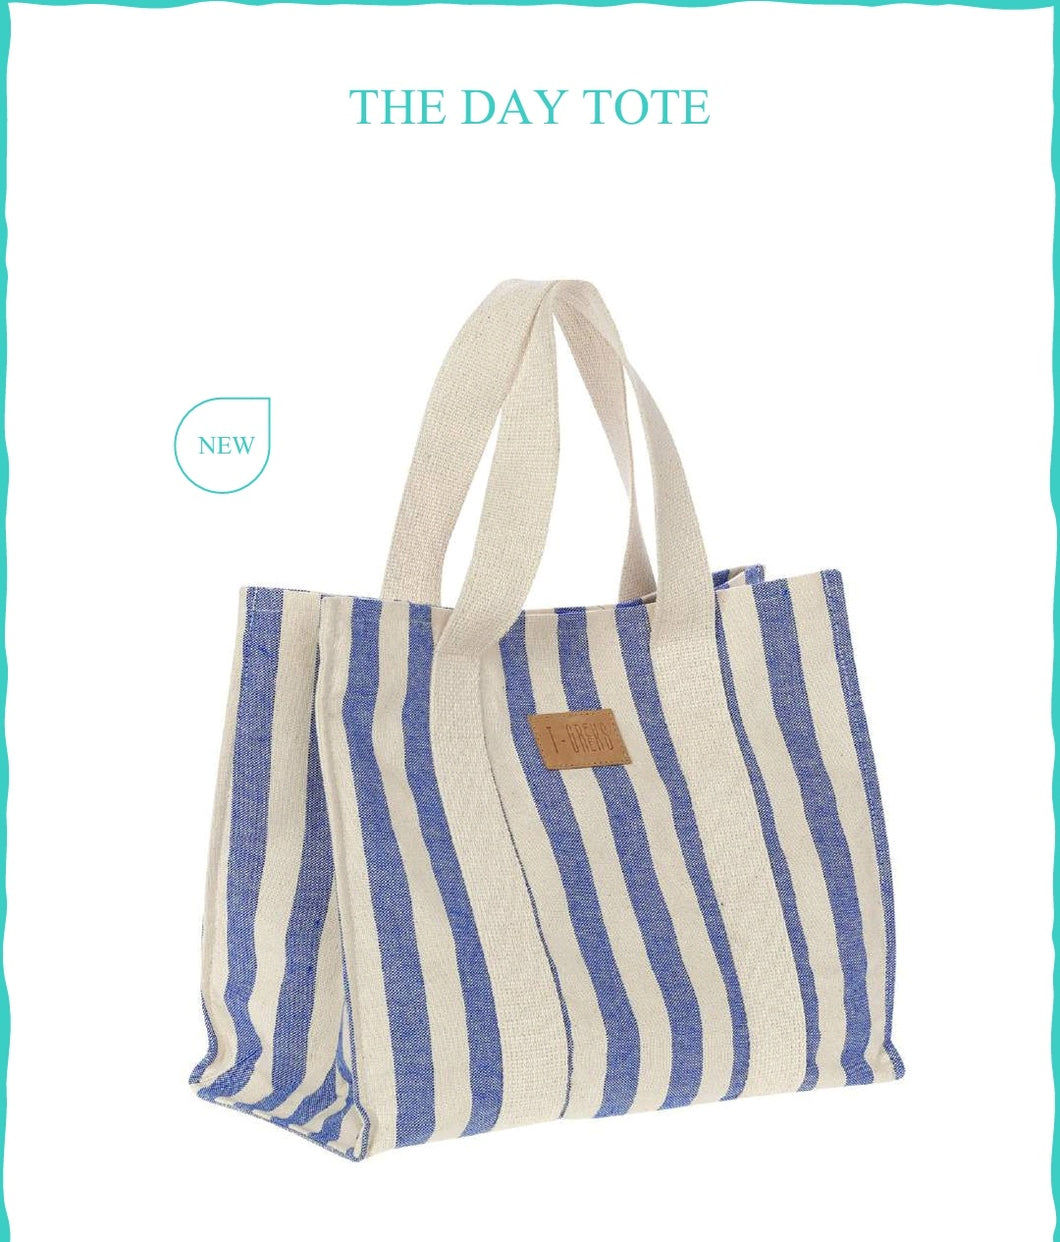 The day tote